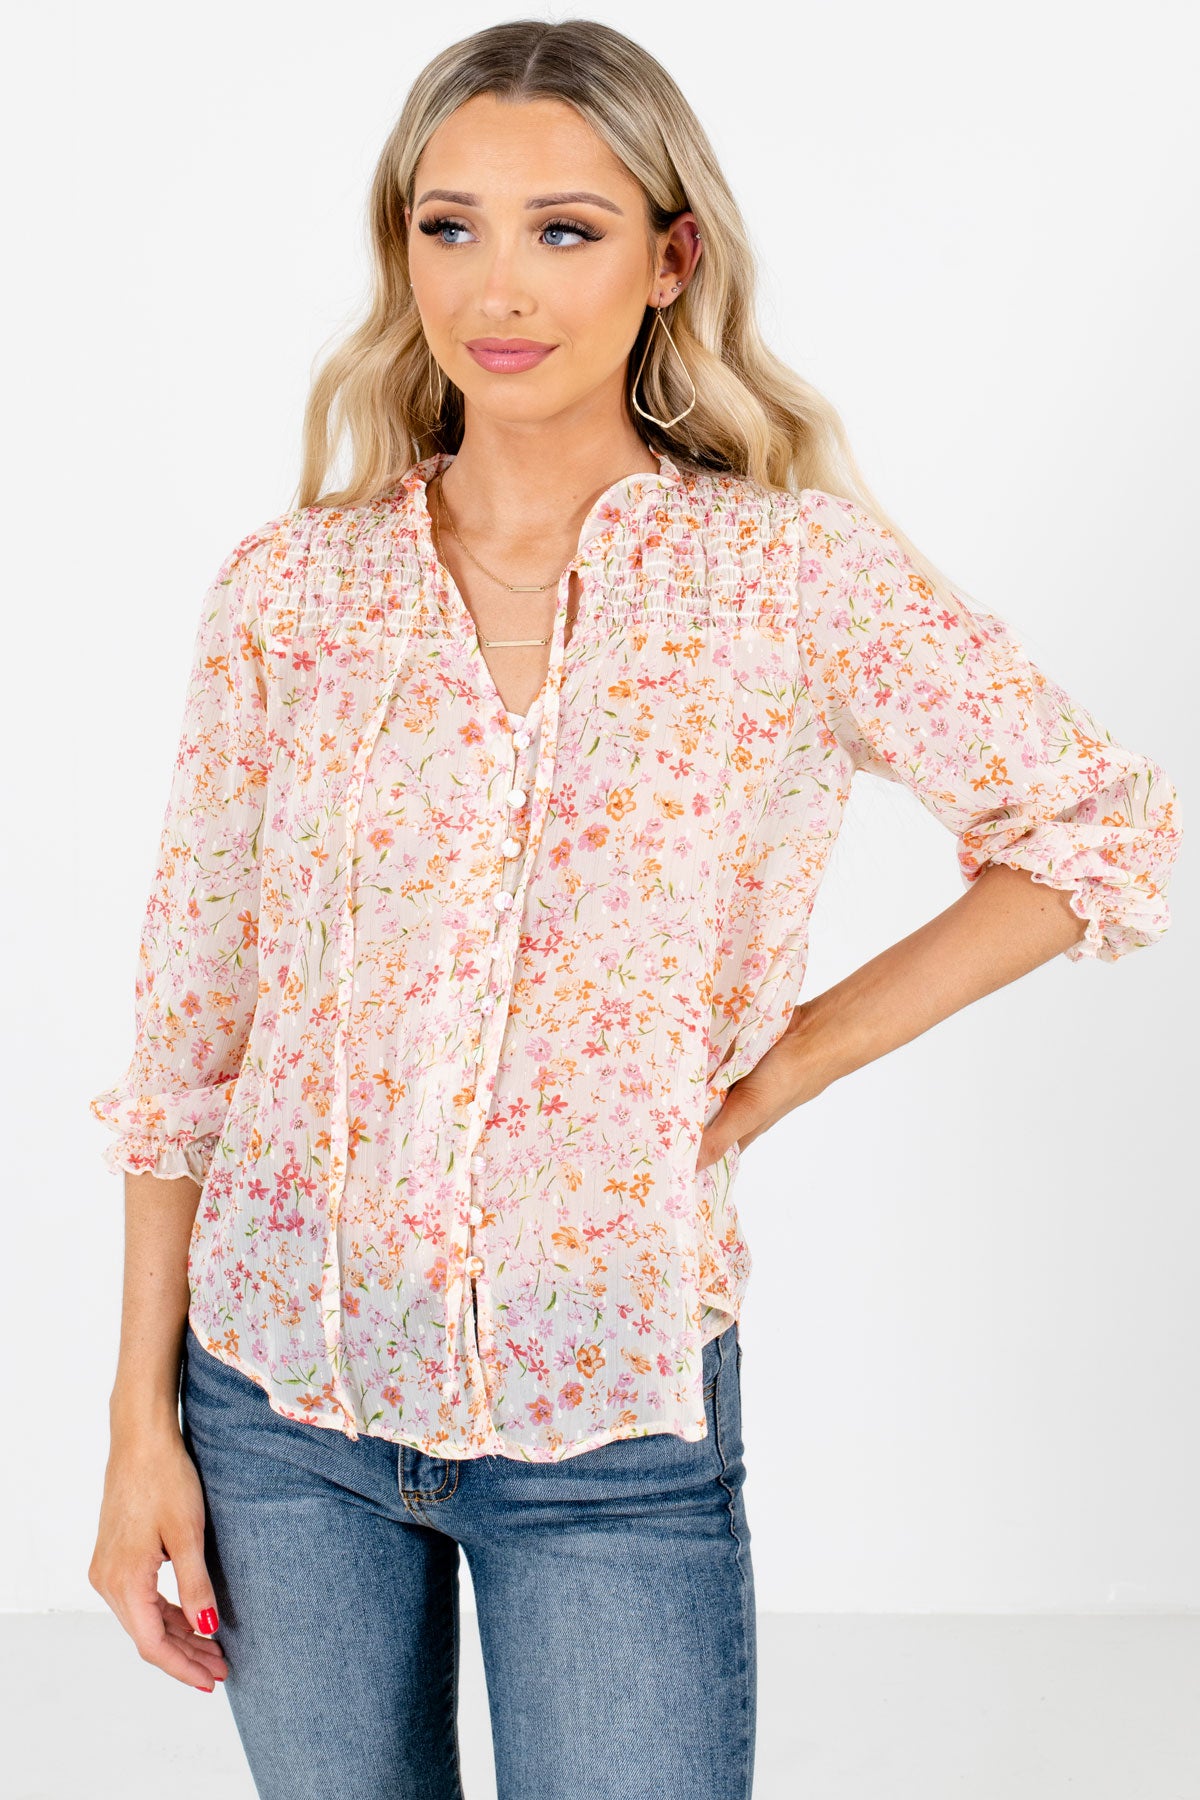 White Multicolored Floral Patterned Boutique Blouses for Women